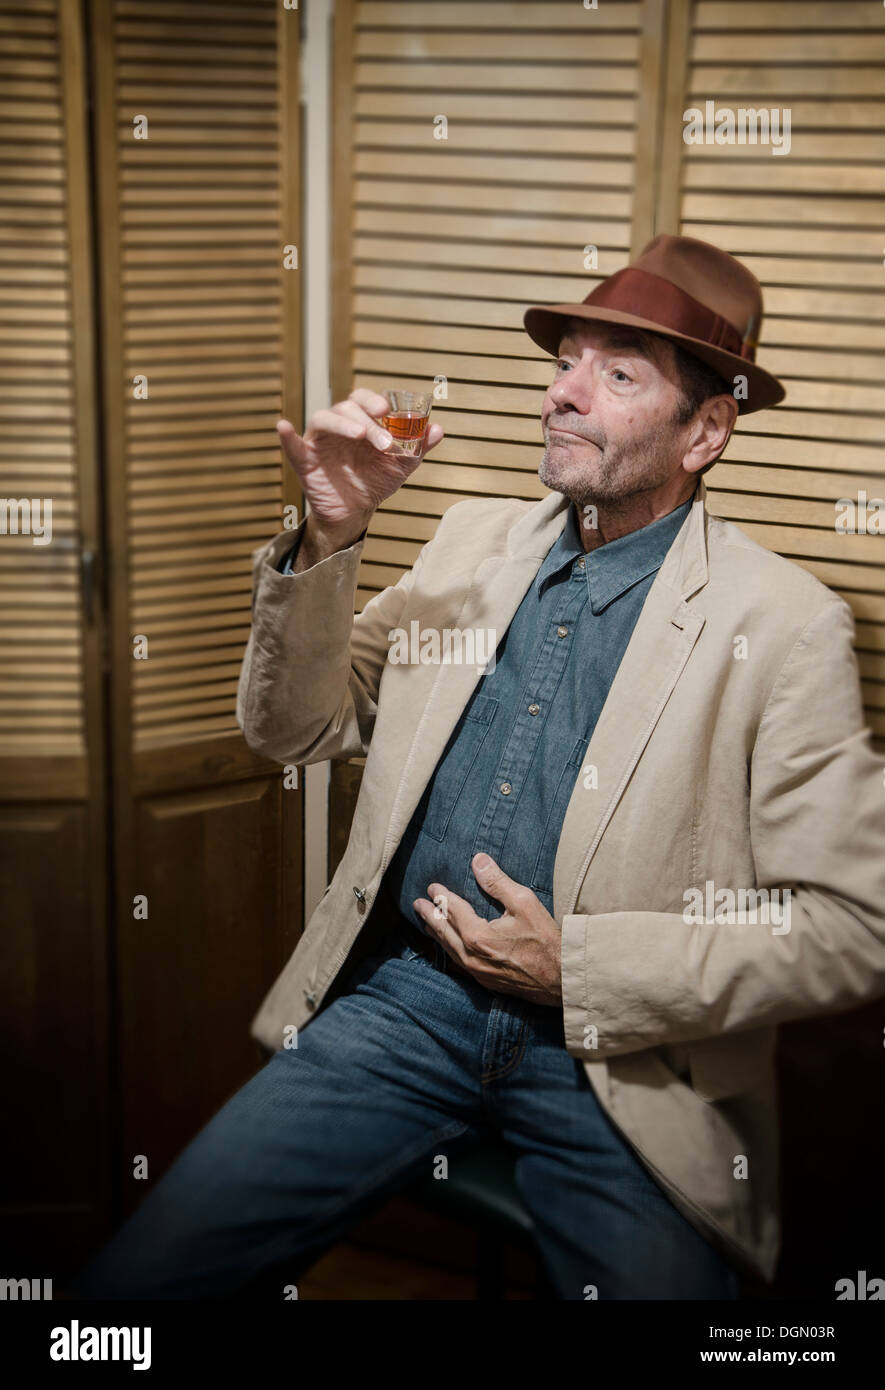 carefree man drinking from shot glass Stock Photo